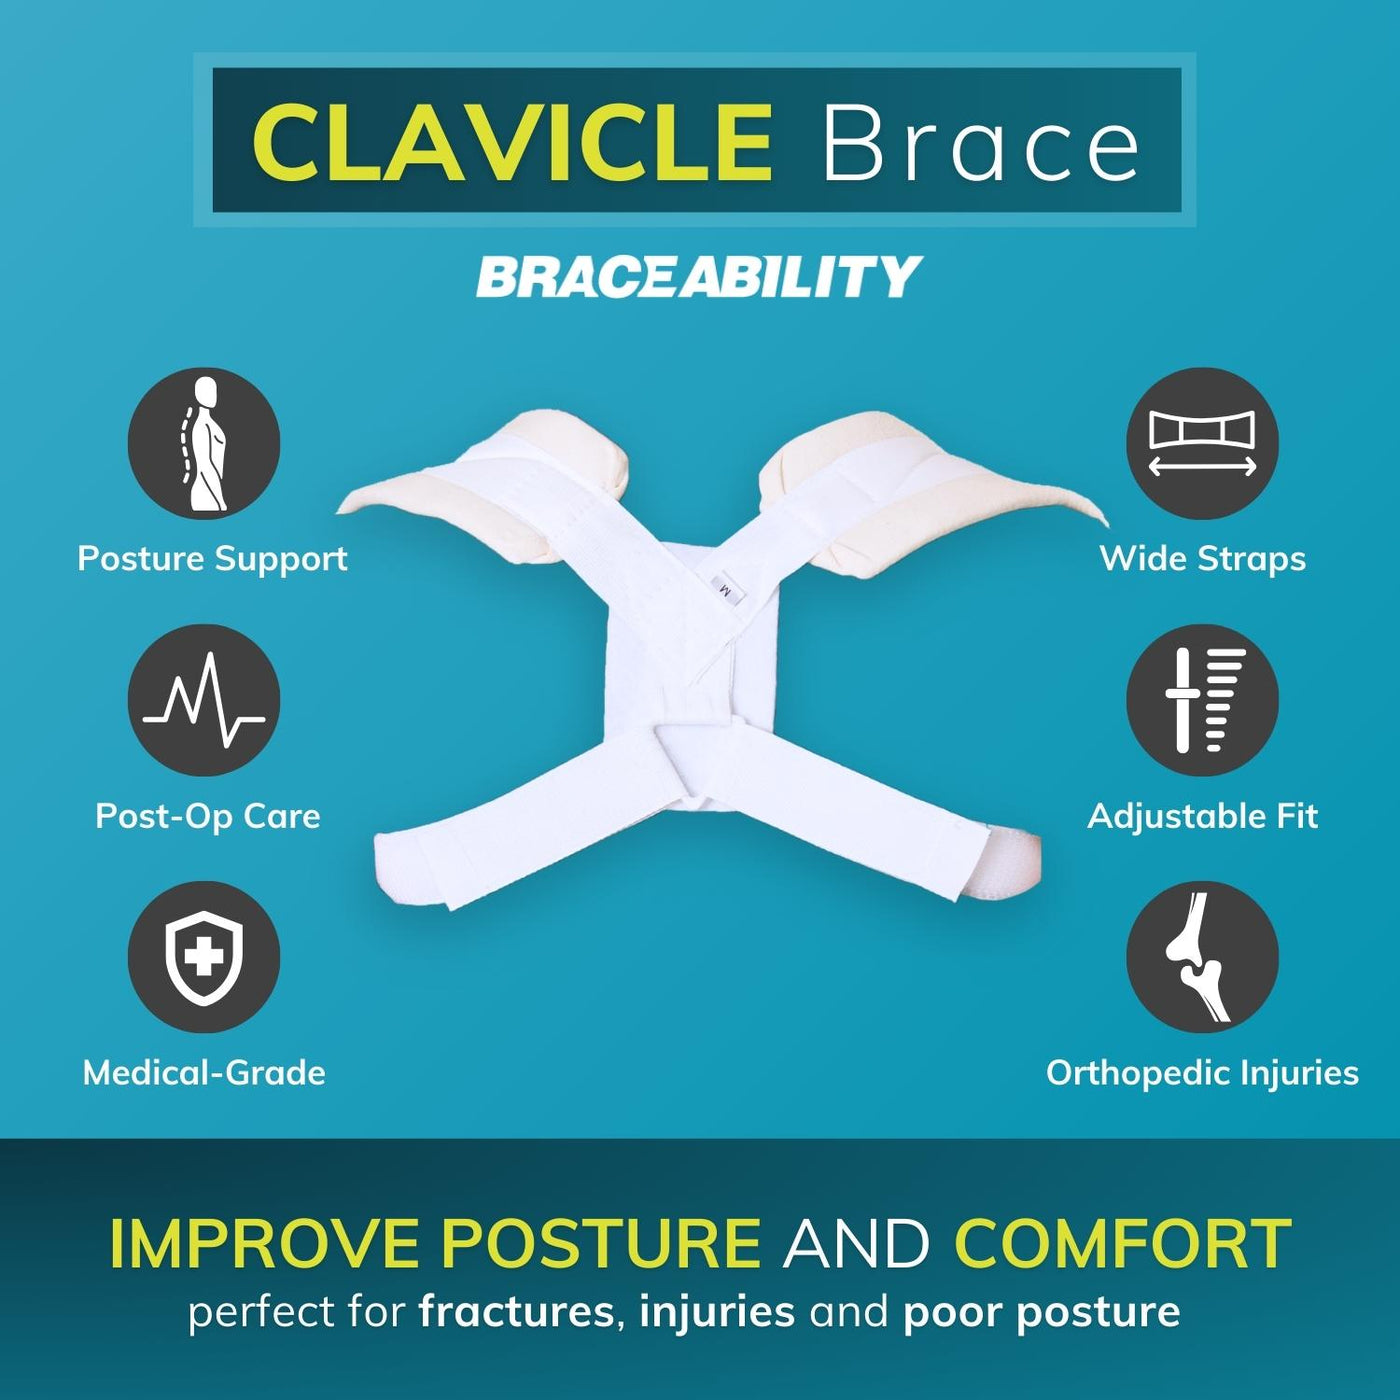 Padded shoulder straps on the posture correction brace are covered in a soft, stockinette material